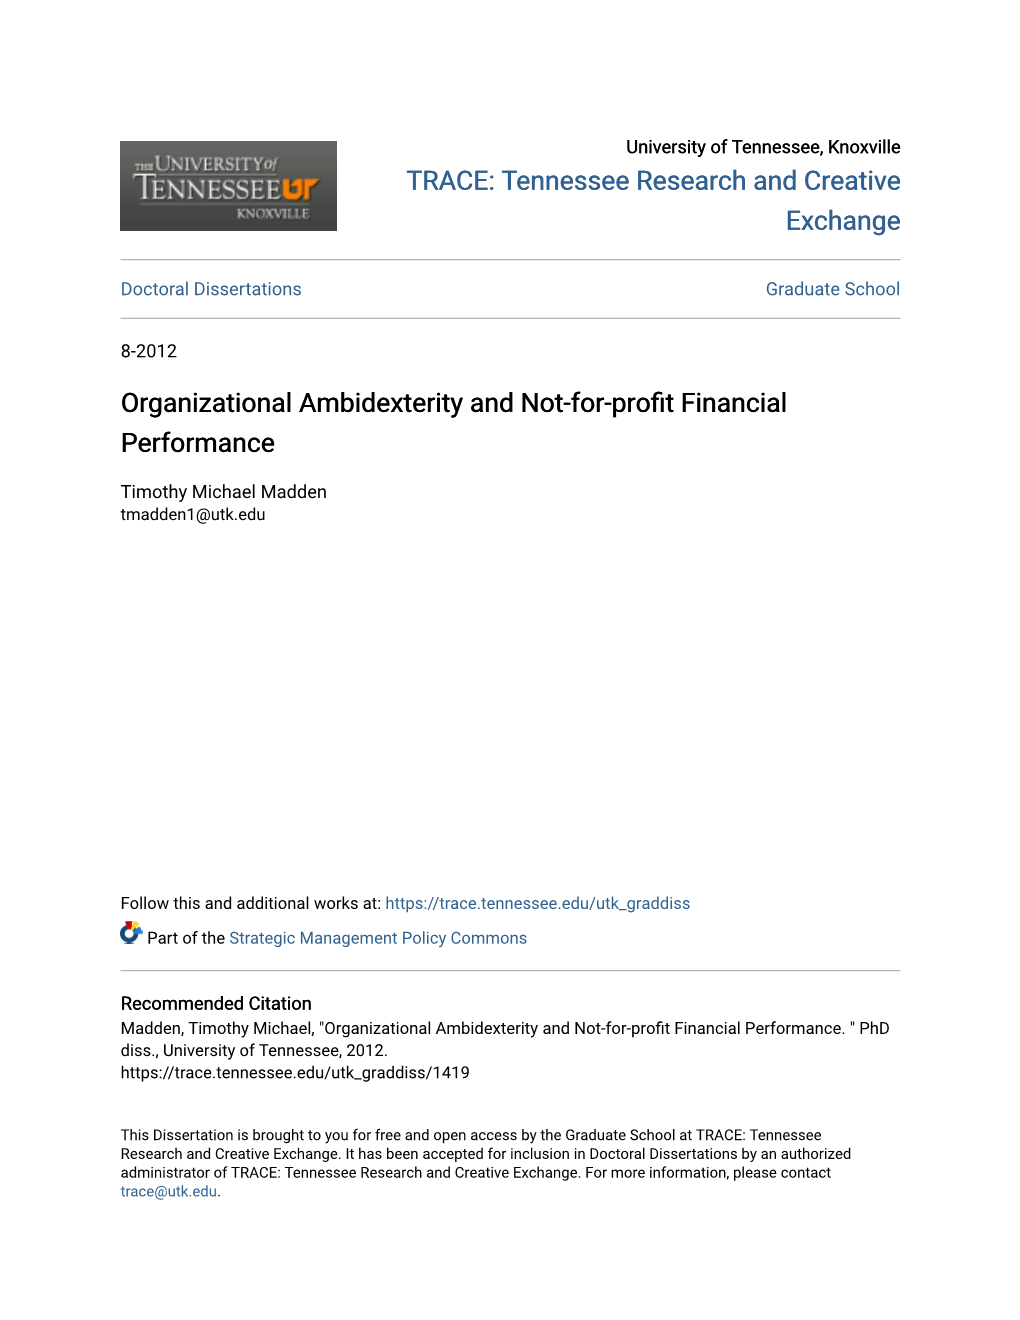 Organizational Ambidexterity and Not-For-Profit Financial Performance